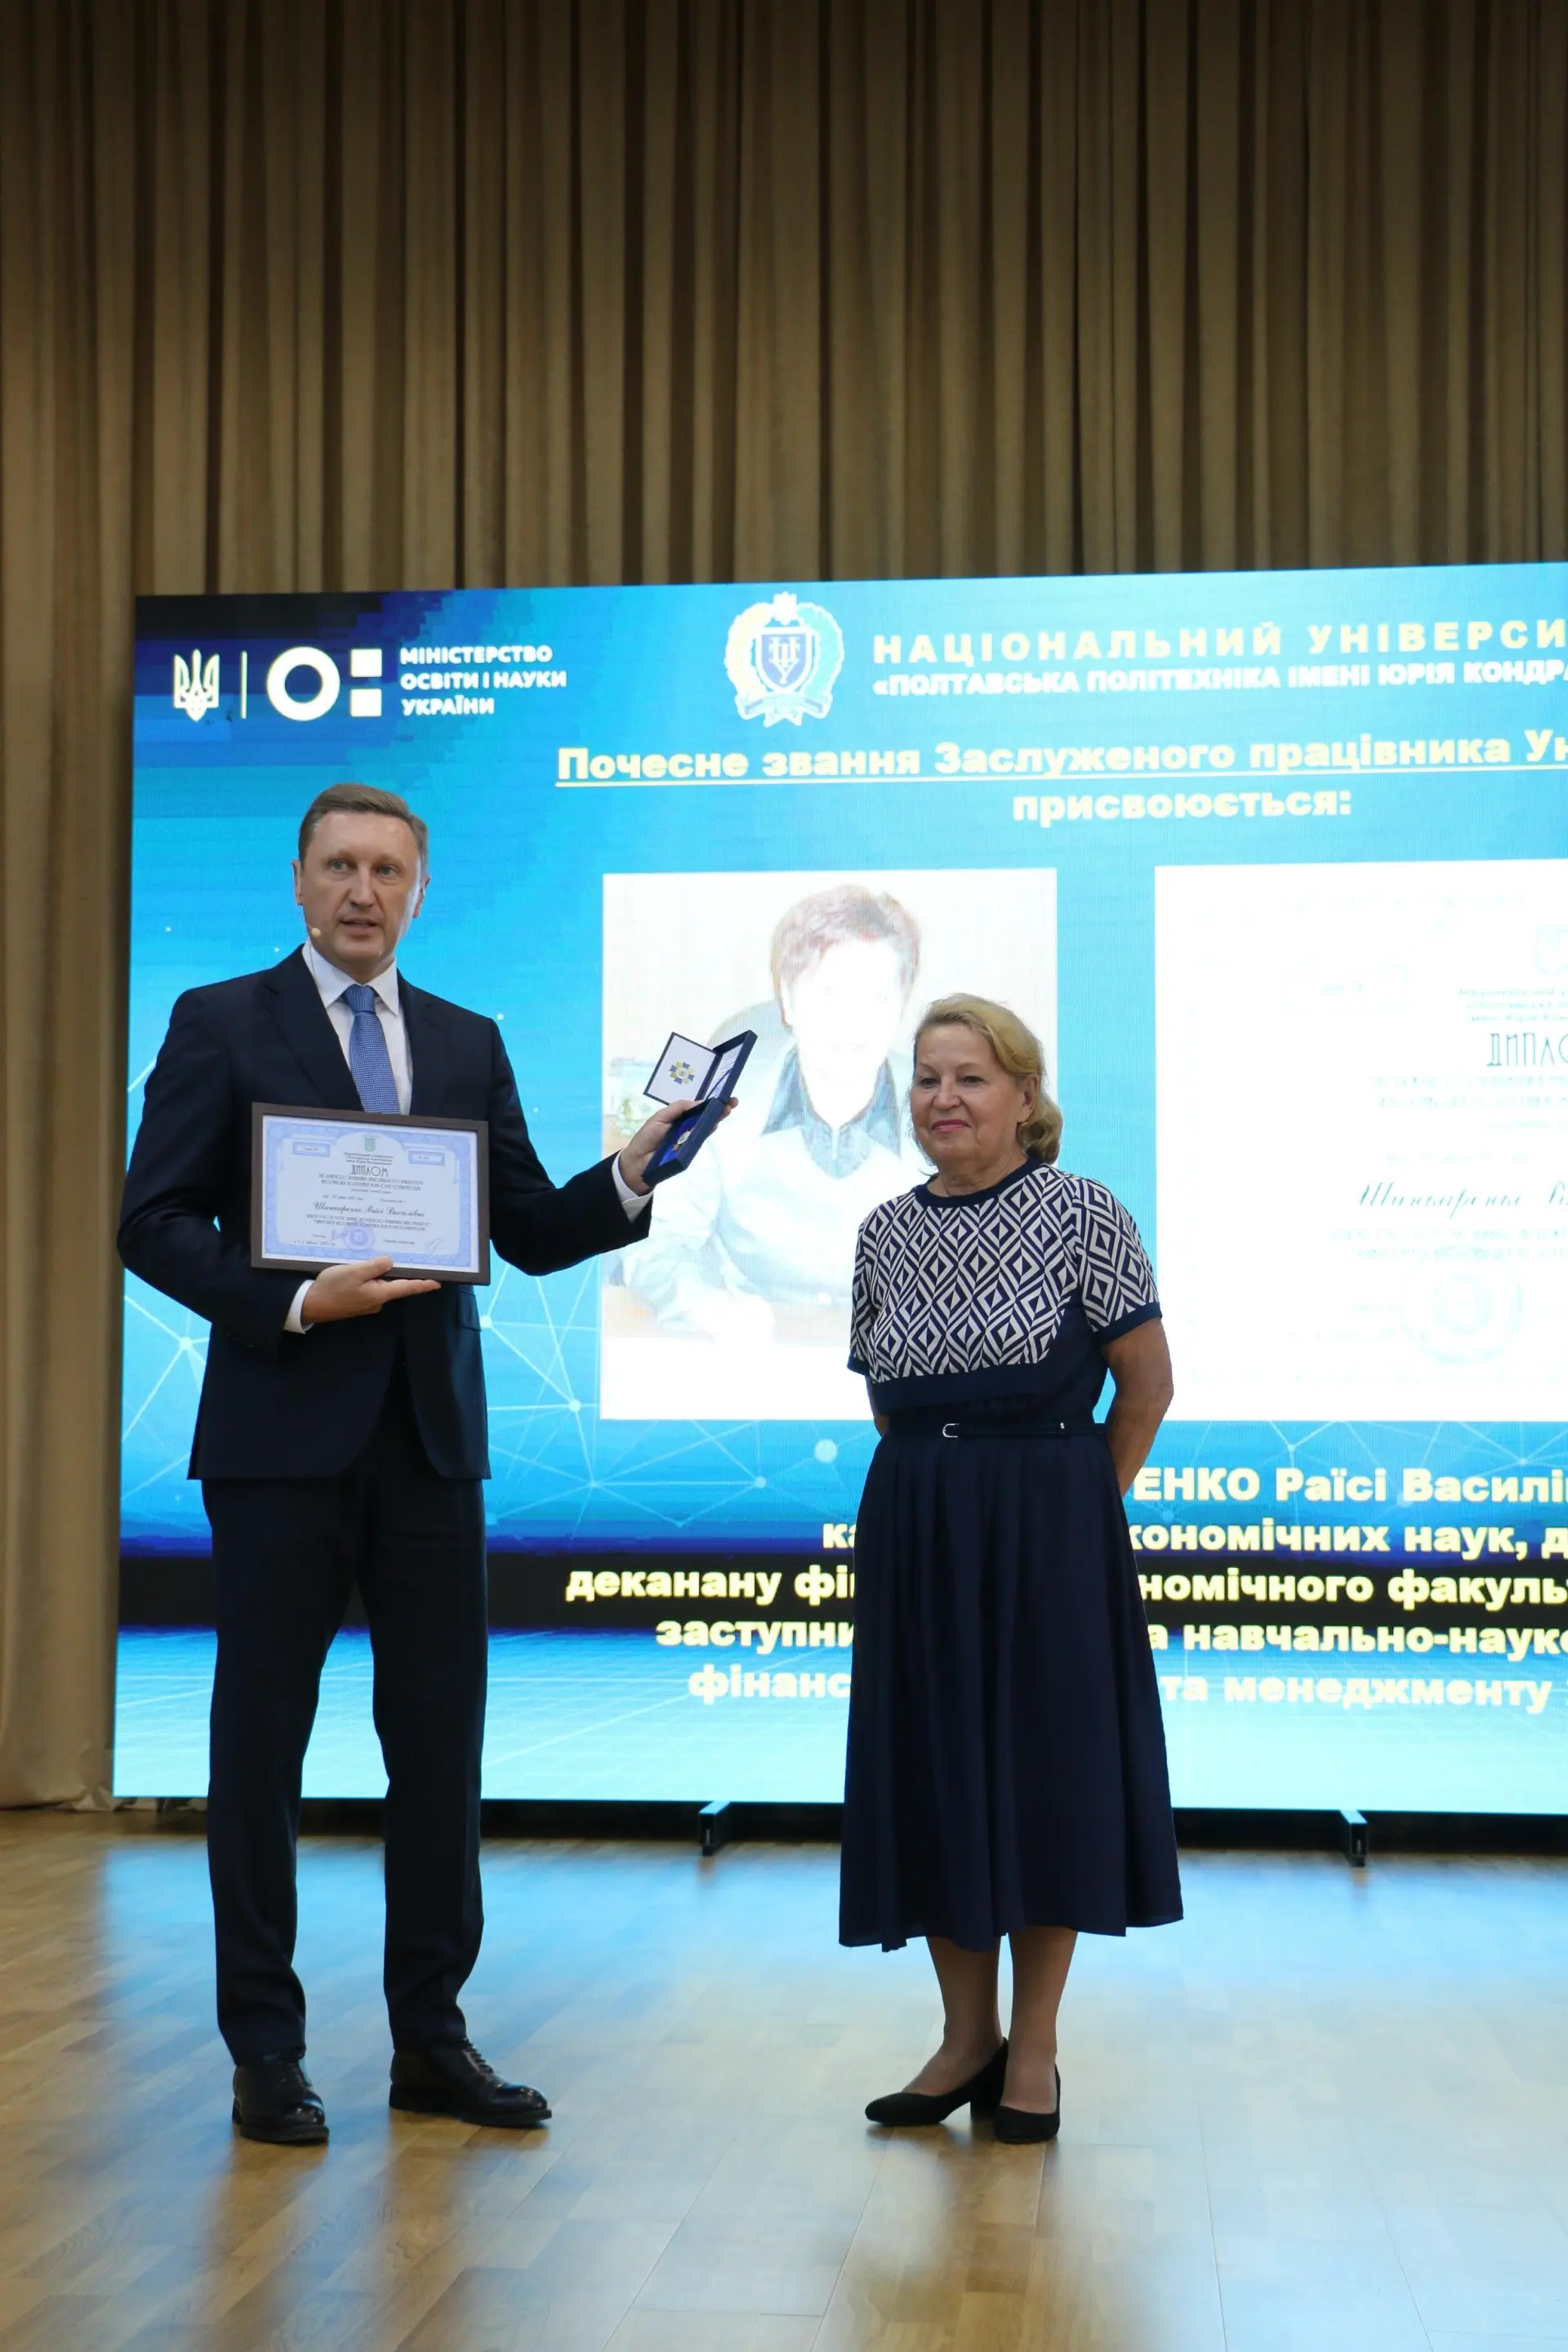 Two scientists are awarded the honorary title of “Honored Worker of the University”